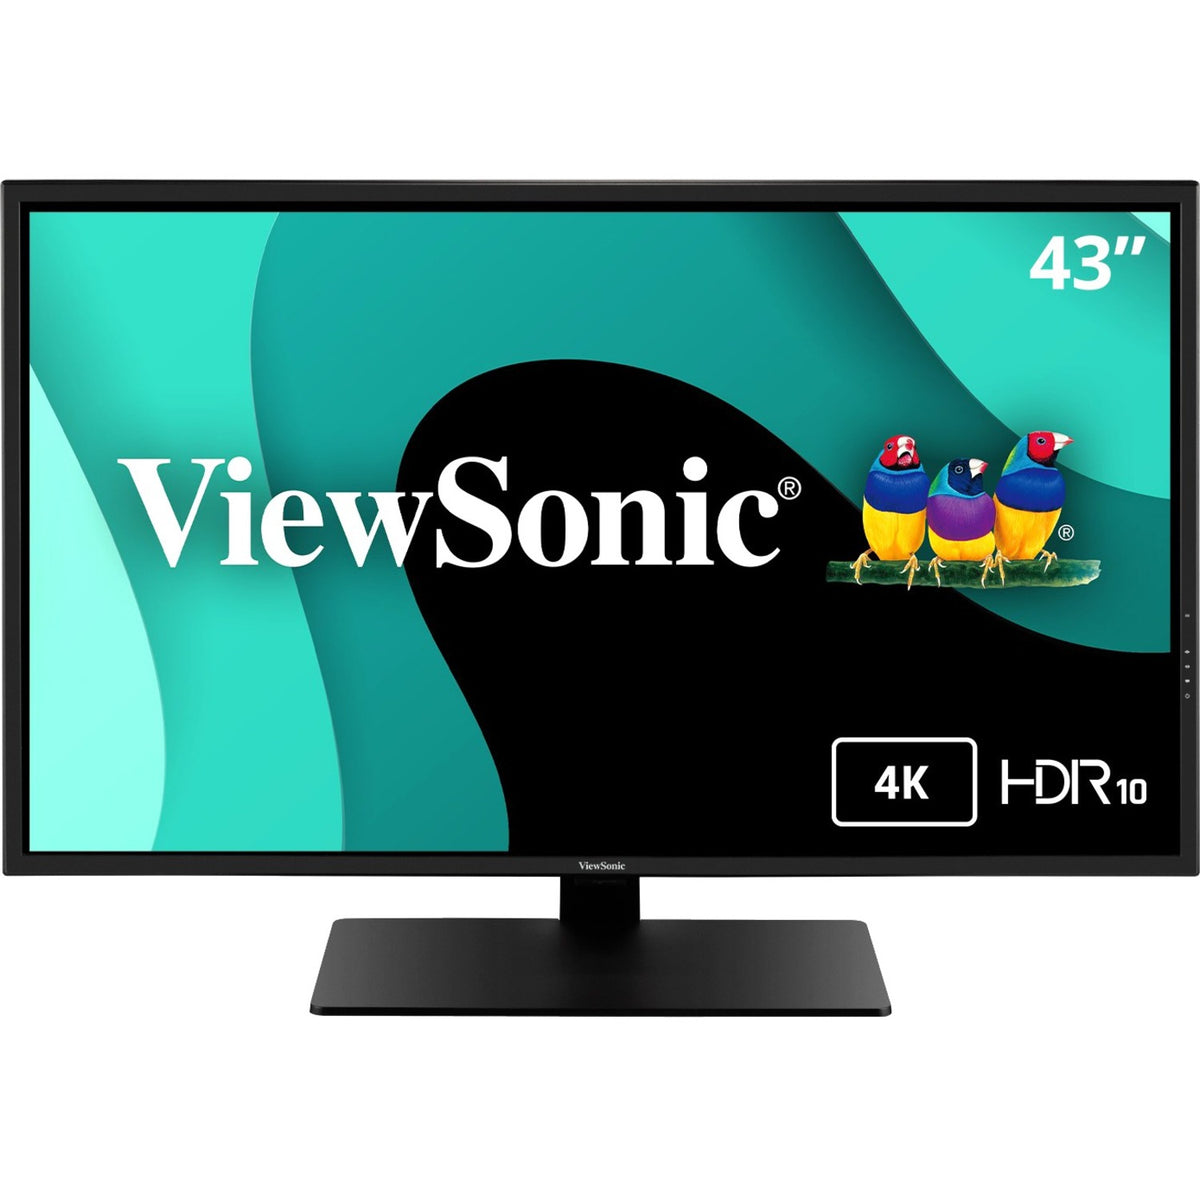 ViewSonic VX4381-4K 43 Inch Ultra HD MVA 4K Monitor Widescreen with HDR10 Support, Eye Care, HDMI, USB, DisplayPort for Home and Office - VX4381-4K